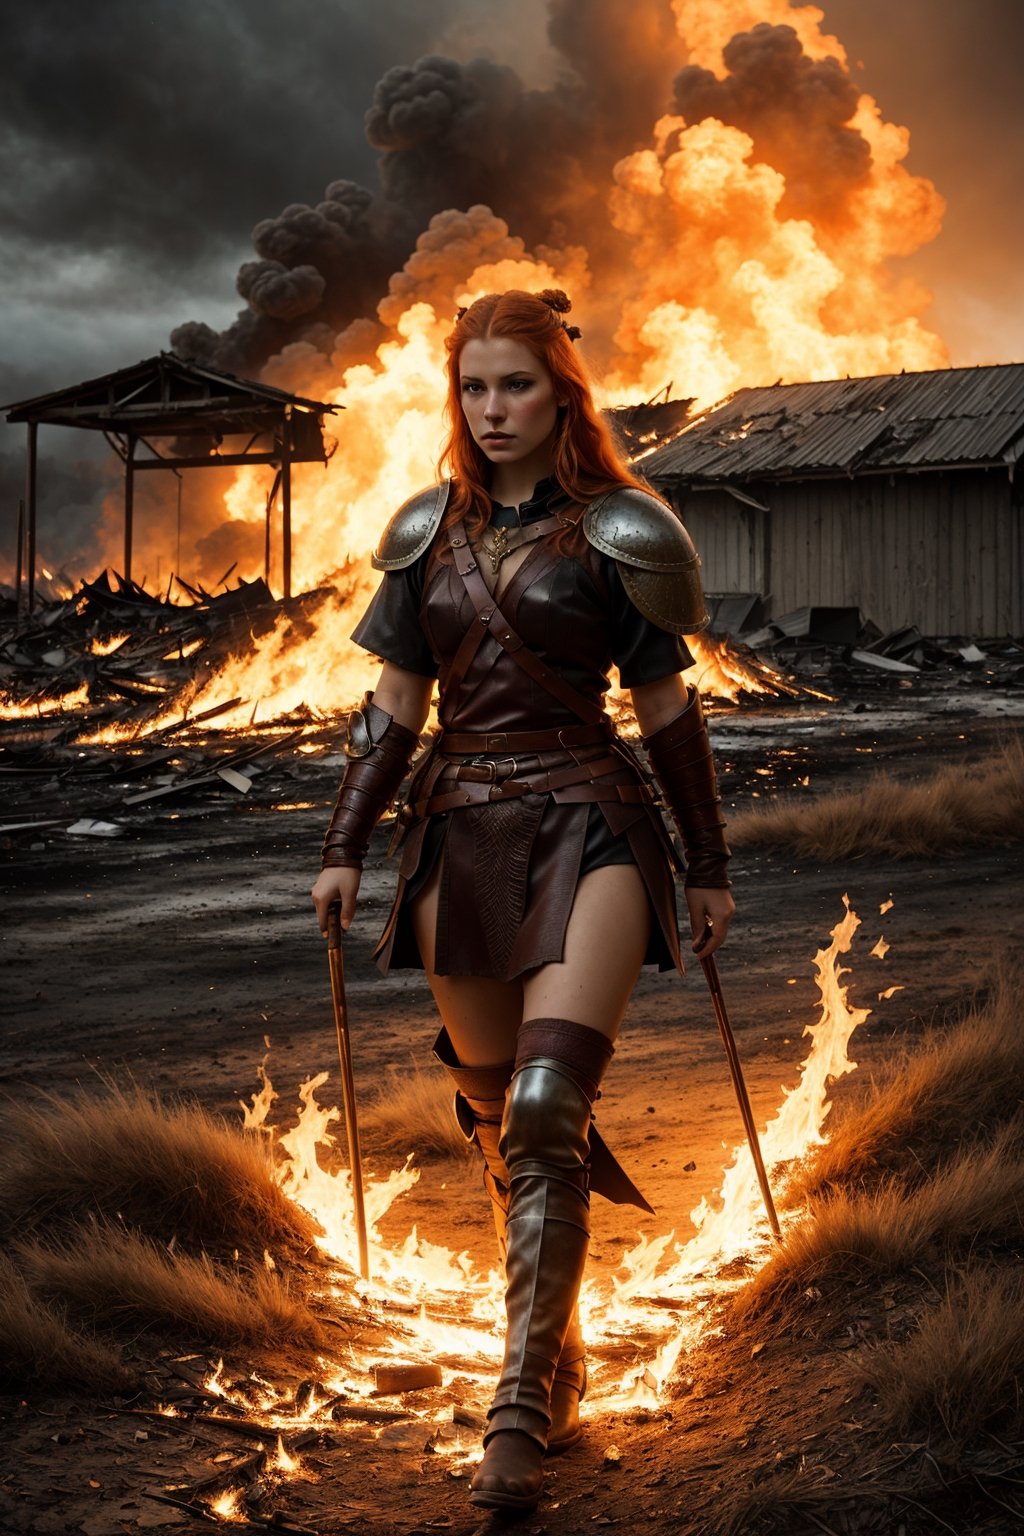 (Detailed depiction, ginger divine viking), In this vivid scene, a ginger-haired female divine viking, her once-proud full plate armor now heavily damaged, stands in melancholic reflection on a war-ravaged battlefield. The backdrop of fire and destruction casts a somber atmosphere, with dirt, misery, and decadence in every corner. The use of tetradic colors enhances the emotional impact, creating a dark and memorable image.